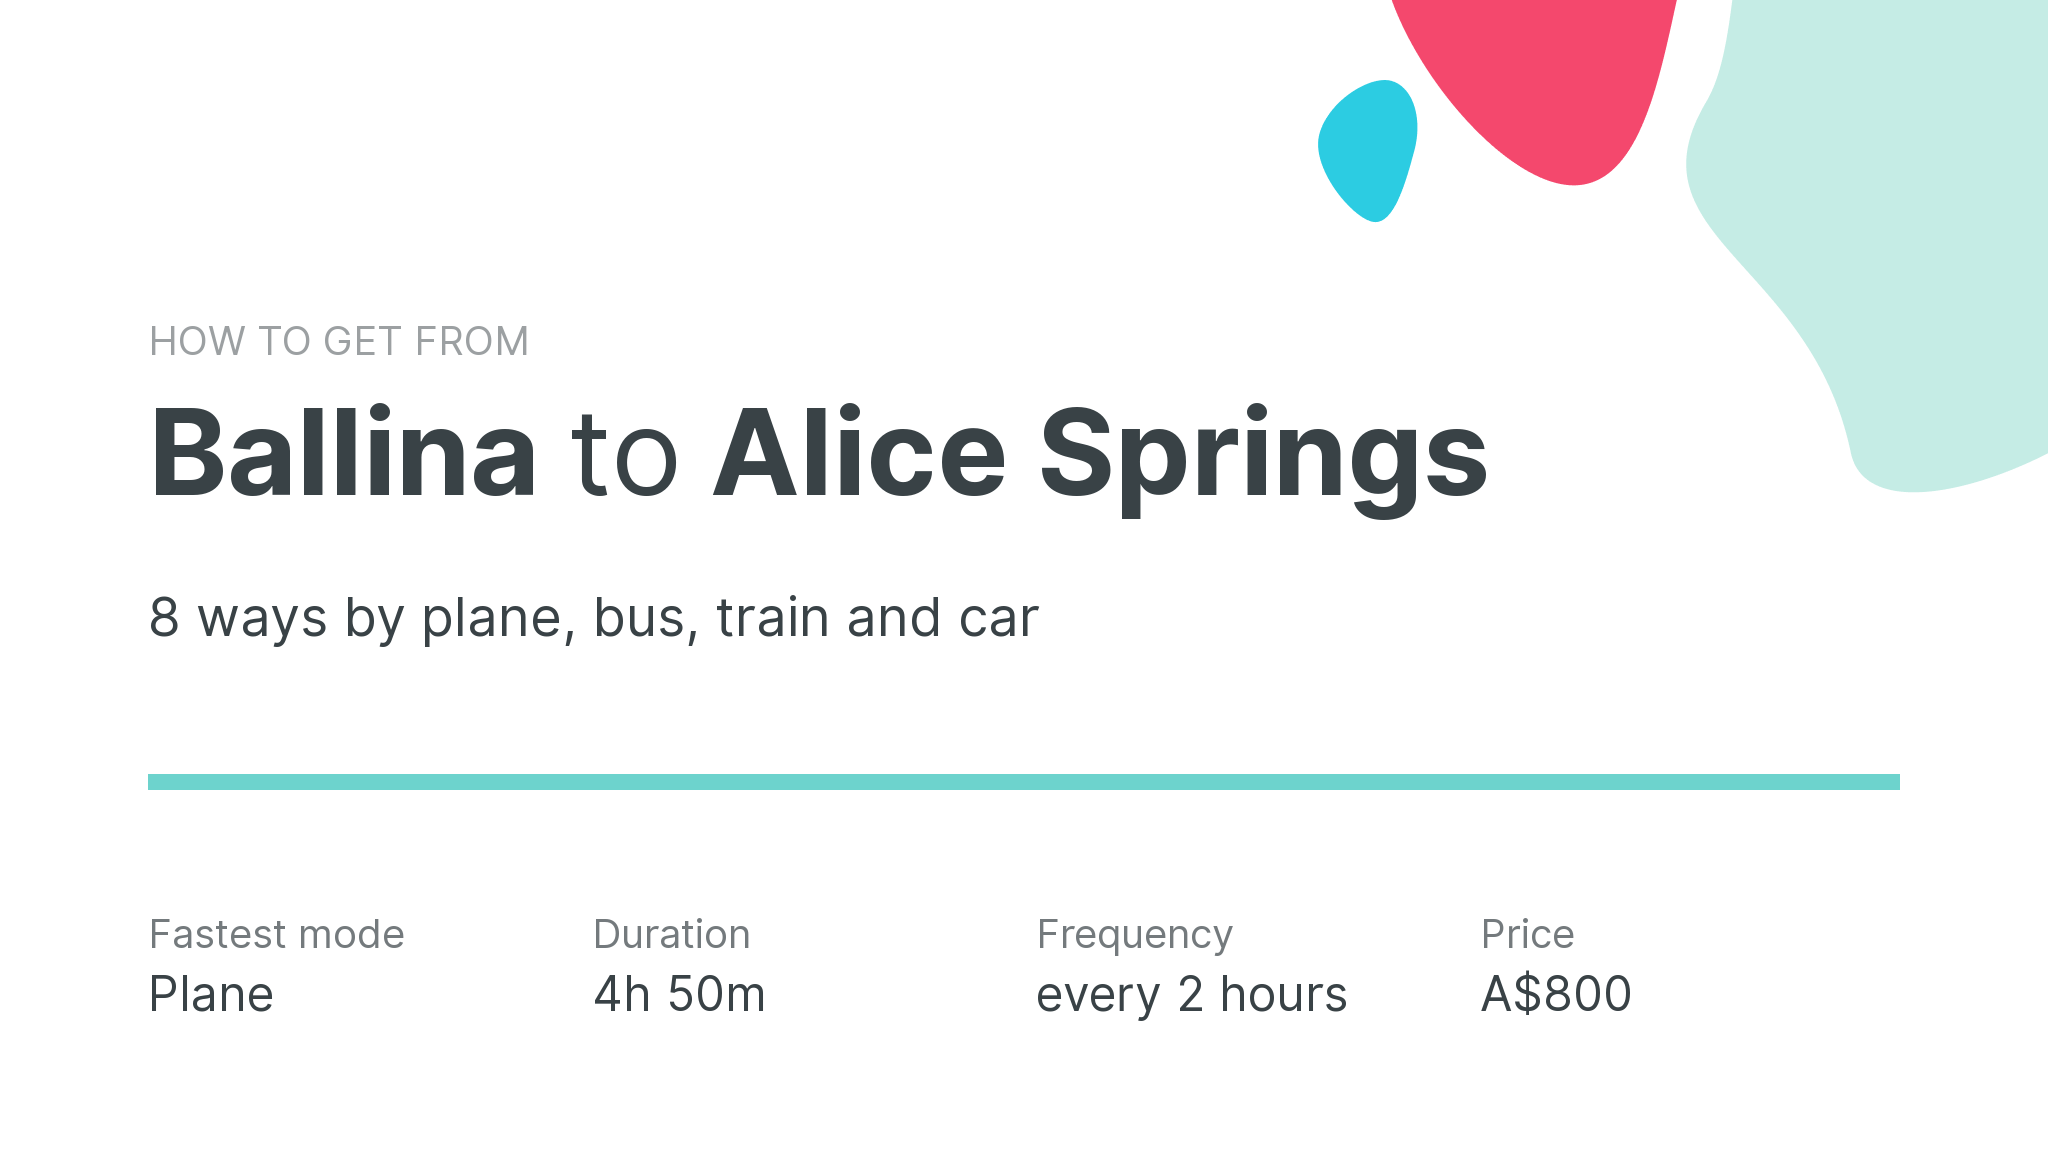 How do I get from Ballina to Alice Springs